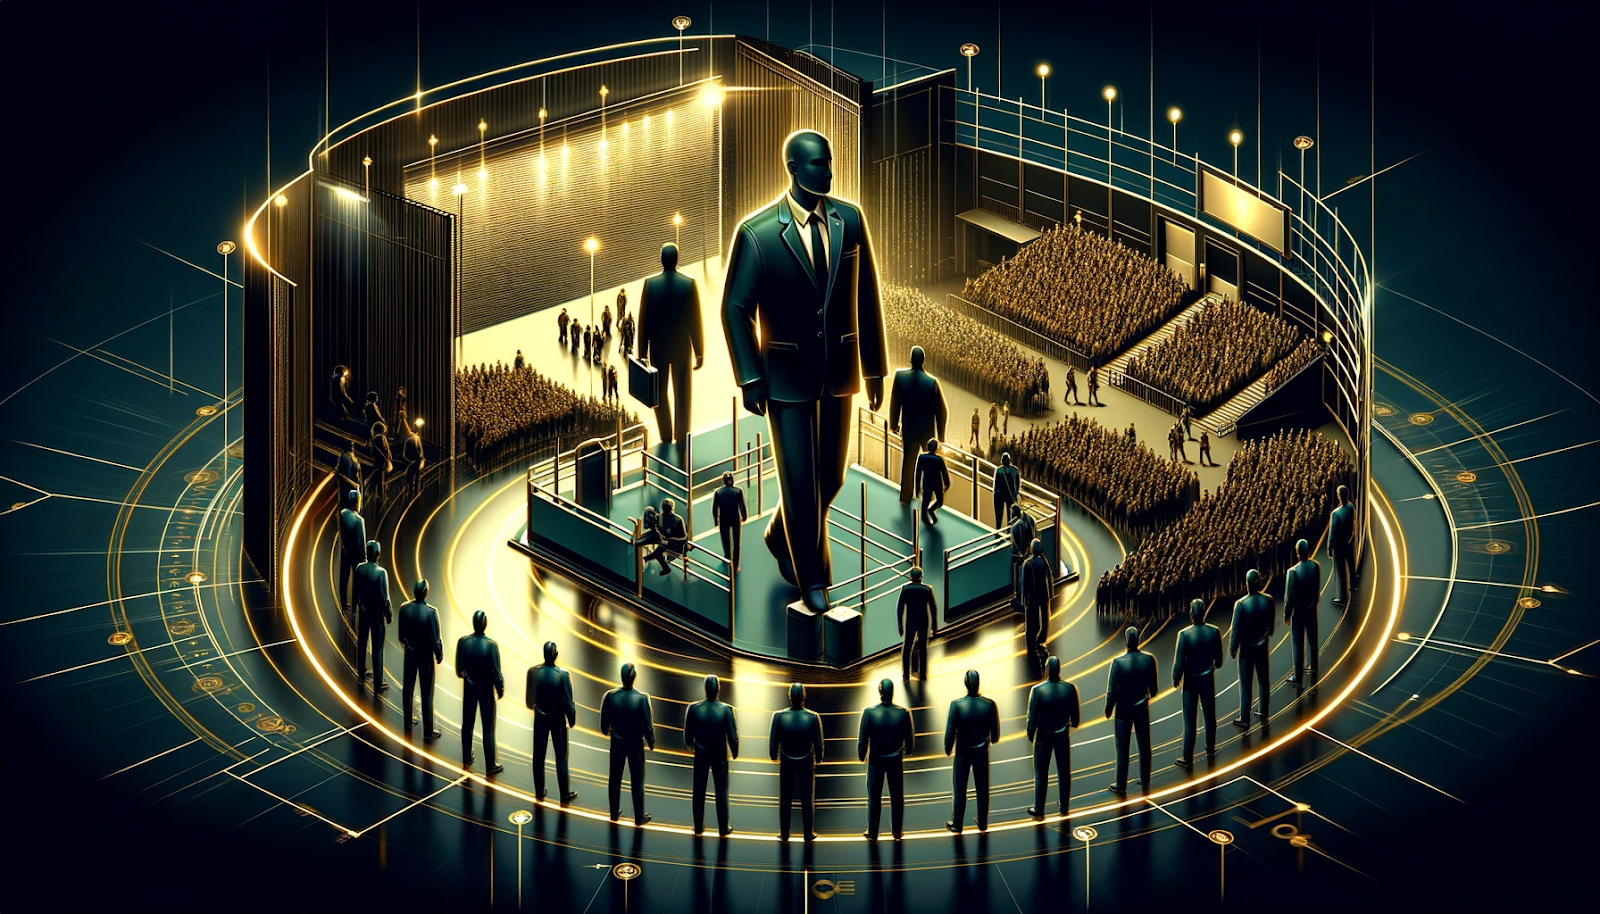 A photorealistic image showing trained event staff managing access points and overseeing crowd control in a secure event environment, representing security training for event staff with symbolic use of the colors black and gold